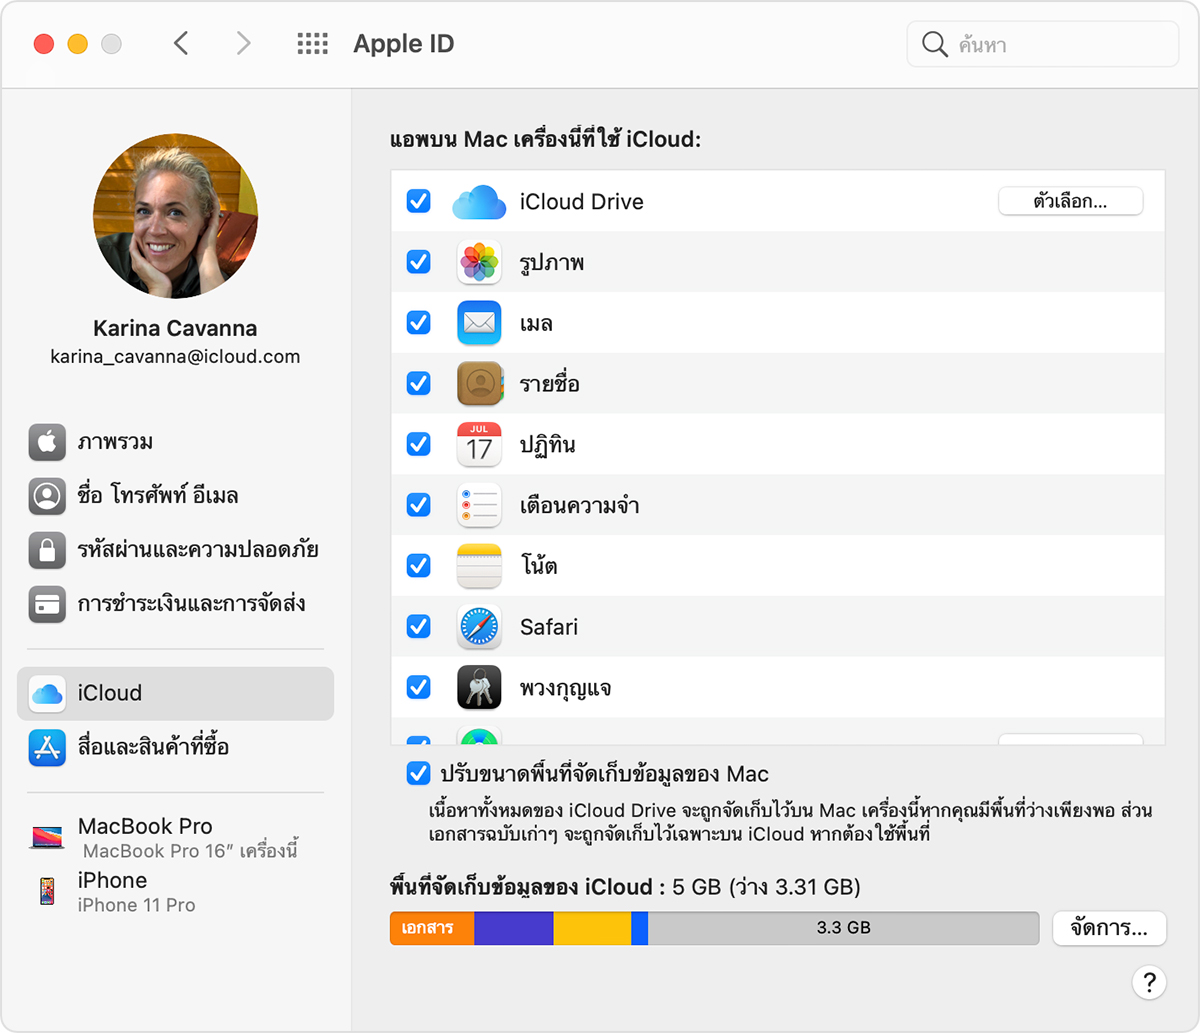 apple email settings for outlook 2016